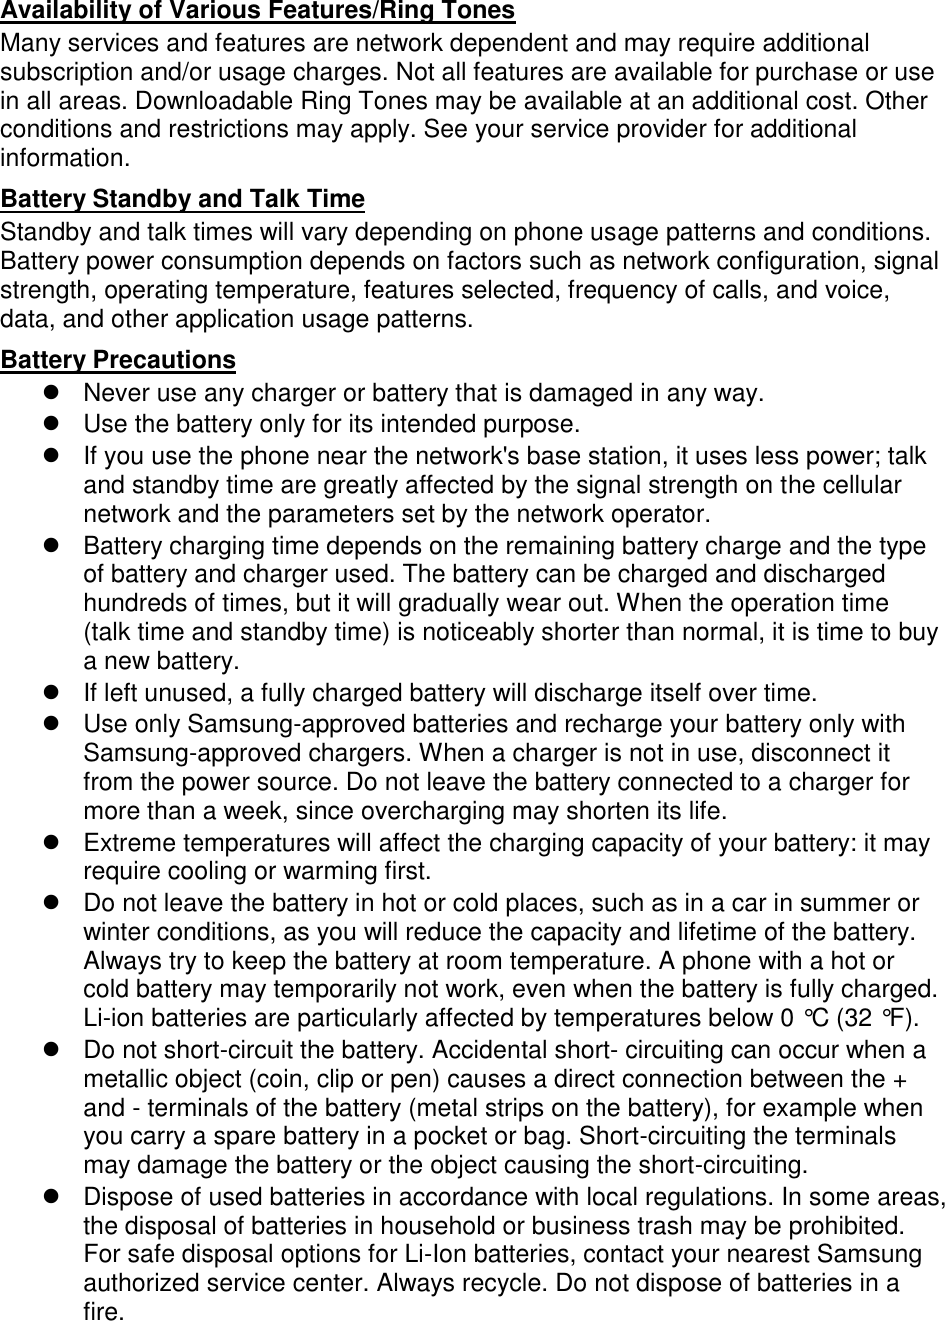 Availability of Various Features/Ring Tones Many services and features are network dependent and may require additional subscription and/or usage charges. Not all features are available for purchase or use in all areas. Downloadable Ring Tones may be available at an additional cost. Other conditions and restrictions may apply. See your service provider for additional information. Battery Standby and Talk Time Standby and talk times will vary depending on phone usage patterns and conditions. Battery power consumption depends on factors such as network configuration, signal strength, operating temperature, features selected, frequency of calls, and voice, data, and other application usage patterns.   Battery Precautions   Never use any charger or battery that is damaged in any way.   Use the battery only for its intended purpose.   If you use the phone near the network&apos;s base station, it uses less power; talk and standby time are greatly affected by the signal strength on the cellular network and the parameters set by the network operator.   Battery charging time depends on the remaining battery charge and the type of battery and charger used. The battery can be charged and discharged hundreds of times, but it will gradually wear out. When the operation time (talk time and standby time) is noticeably shorter than normal, it is time to buy a new battery.   If left unused, a fully charged battery will discharge itself over time.   Use only Samsung-approved batteries and recharge your battery only with Samsung-approved chargers. When a charger is not in use, disconnect it from the power source. Do not leave the battery connected to a charger for more than a week, since overcharging may shorten its life.   Extreme temperatures will affect the charging capacity of your battery: it may require cooling or warming first.   Do not leave the battery in hot or cold places, such as in a car in summer or winter conditions, as you will reduce the capacity and lifetime of the battery. Always try to keep the battery at room temperature. A phone with a hot or cold battery may temporarily not work, even when the battery is fully charged. Li-ion batteries are particularly affected by temperatures below 0 °C (32 °F).   Do not short-circuit the battery. Accidental short- circuiting can occur when a metallic object (coin, clip or pen) causes a direct connection between the + and - terminals of the battery (metal strips on the battery), for example when you carry a spare battery in a pocket or bag. Short-circuiting the terminals may damage the battery or the object causing the short-circuiting.   Dispose of used batteries in accordance with local regulations. In some areas, the disposal of batteries in household or business trash may be prohibited. For safe disposal options for Li-Ion batteries, contact your nearest Samsung authorized service center. Always recycle. Do not dispose of batteries in a fire. 